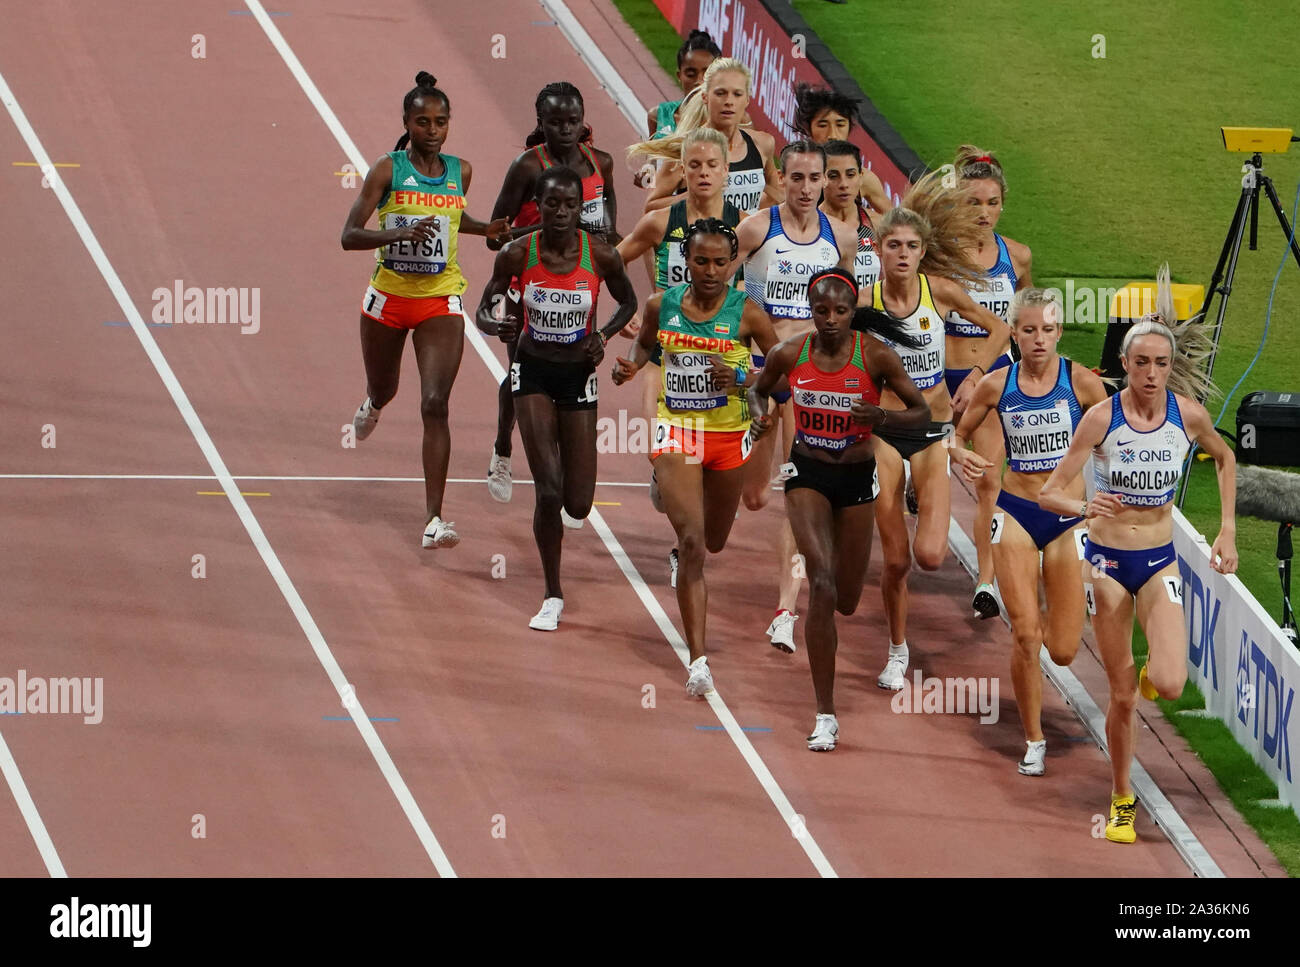 Doha, Qatar. 5th Oct, 2019. Athletes compete during the Women's 5000m Final at the 2019 IAAF World Athletics Championships in Doha, Qatar, Oct. 5, 2019. Credit: Wang Jingqiang/Xinhua/Alamy Live News Stock Photo